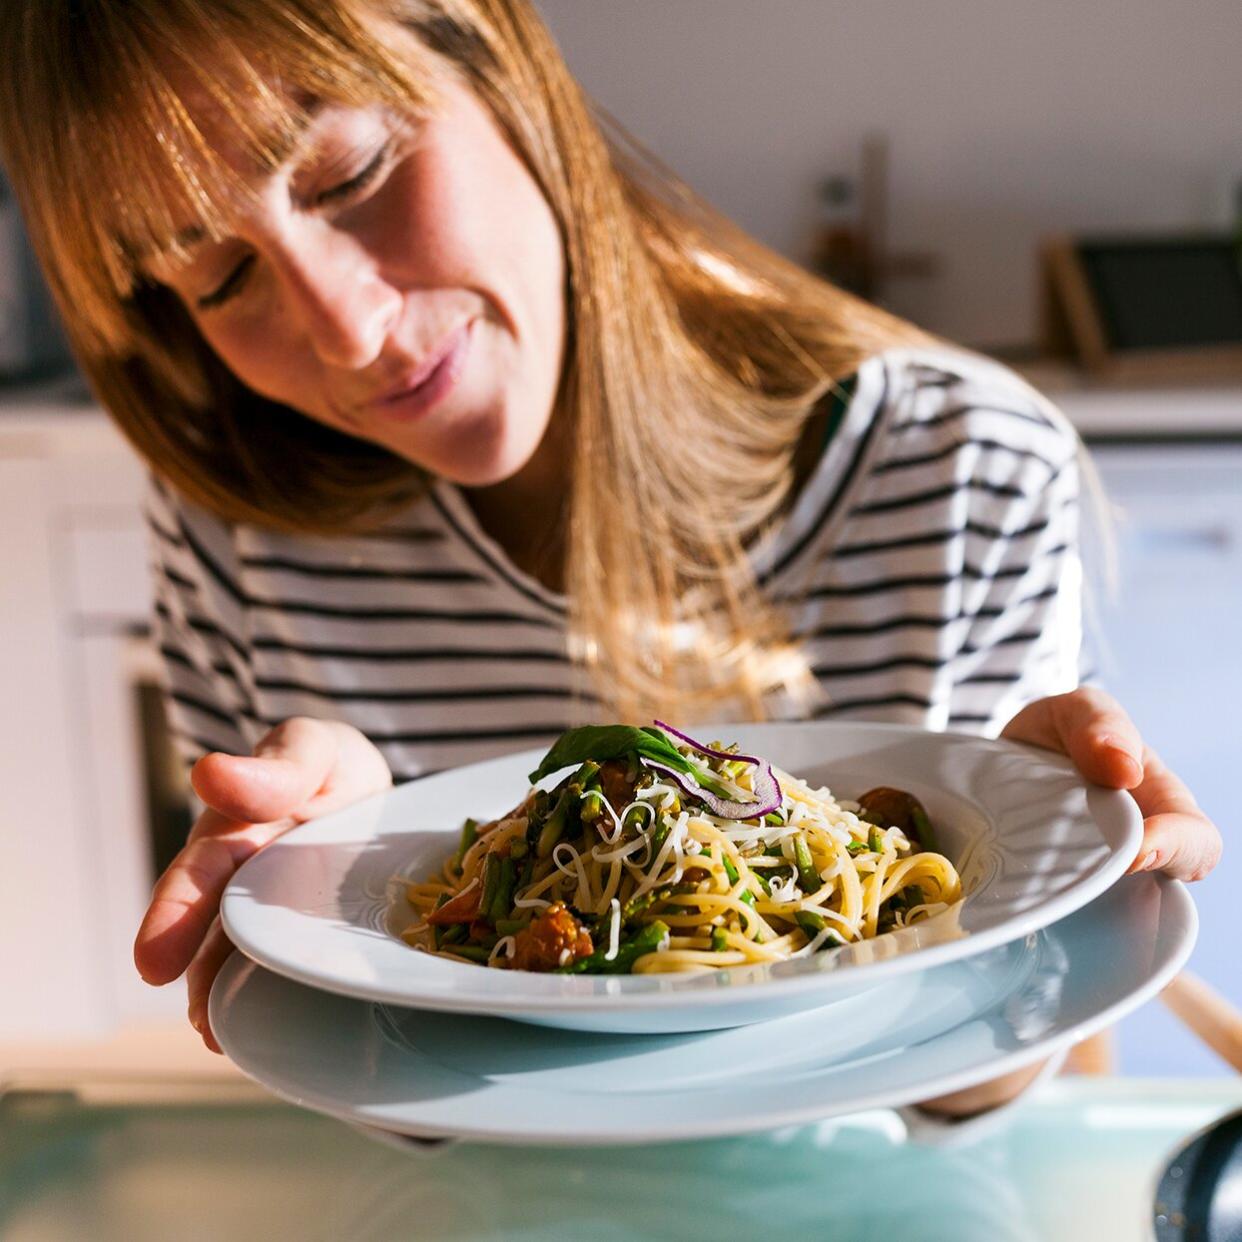 A woman cooking dinner from a plant-based meal delivery service